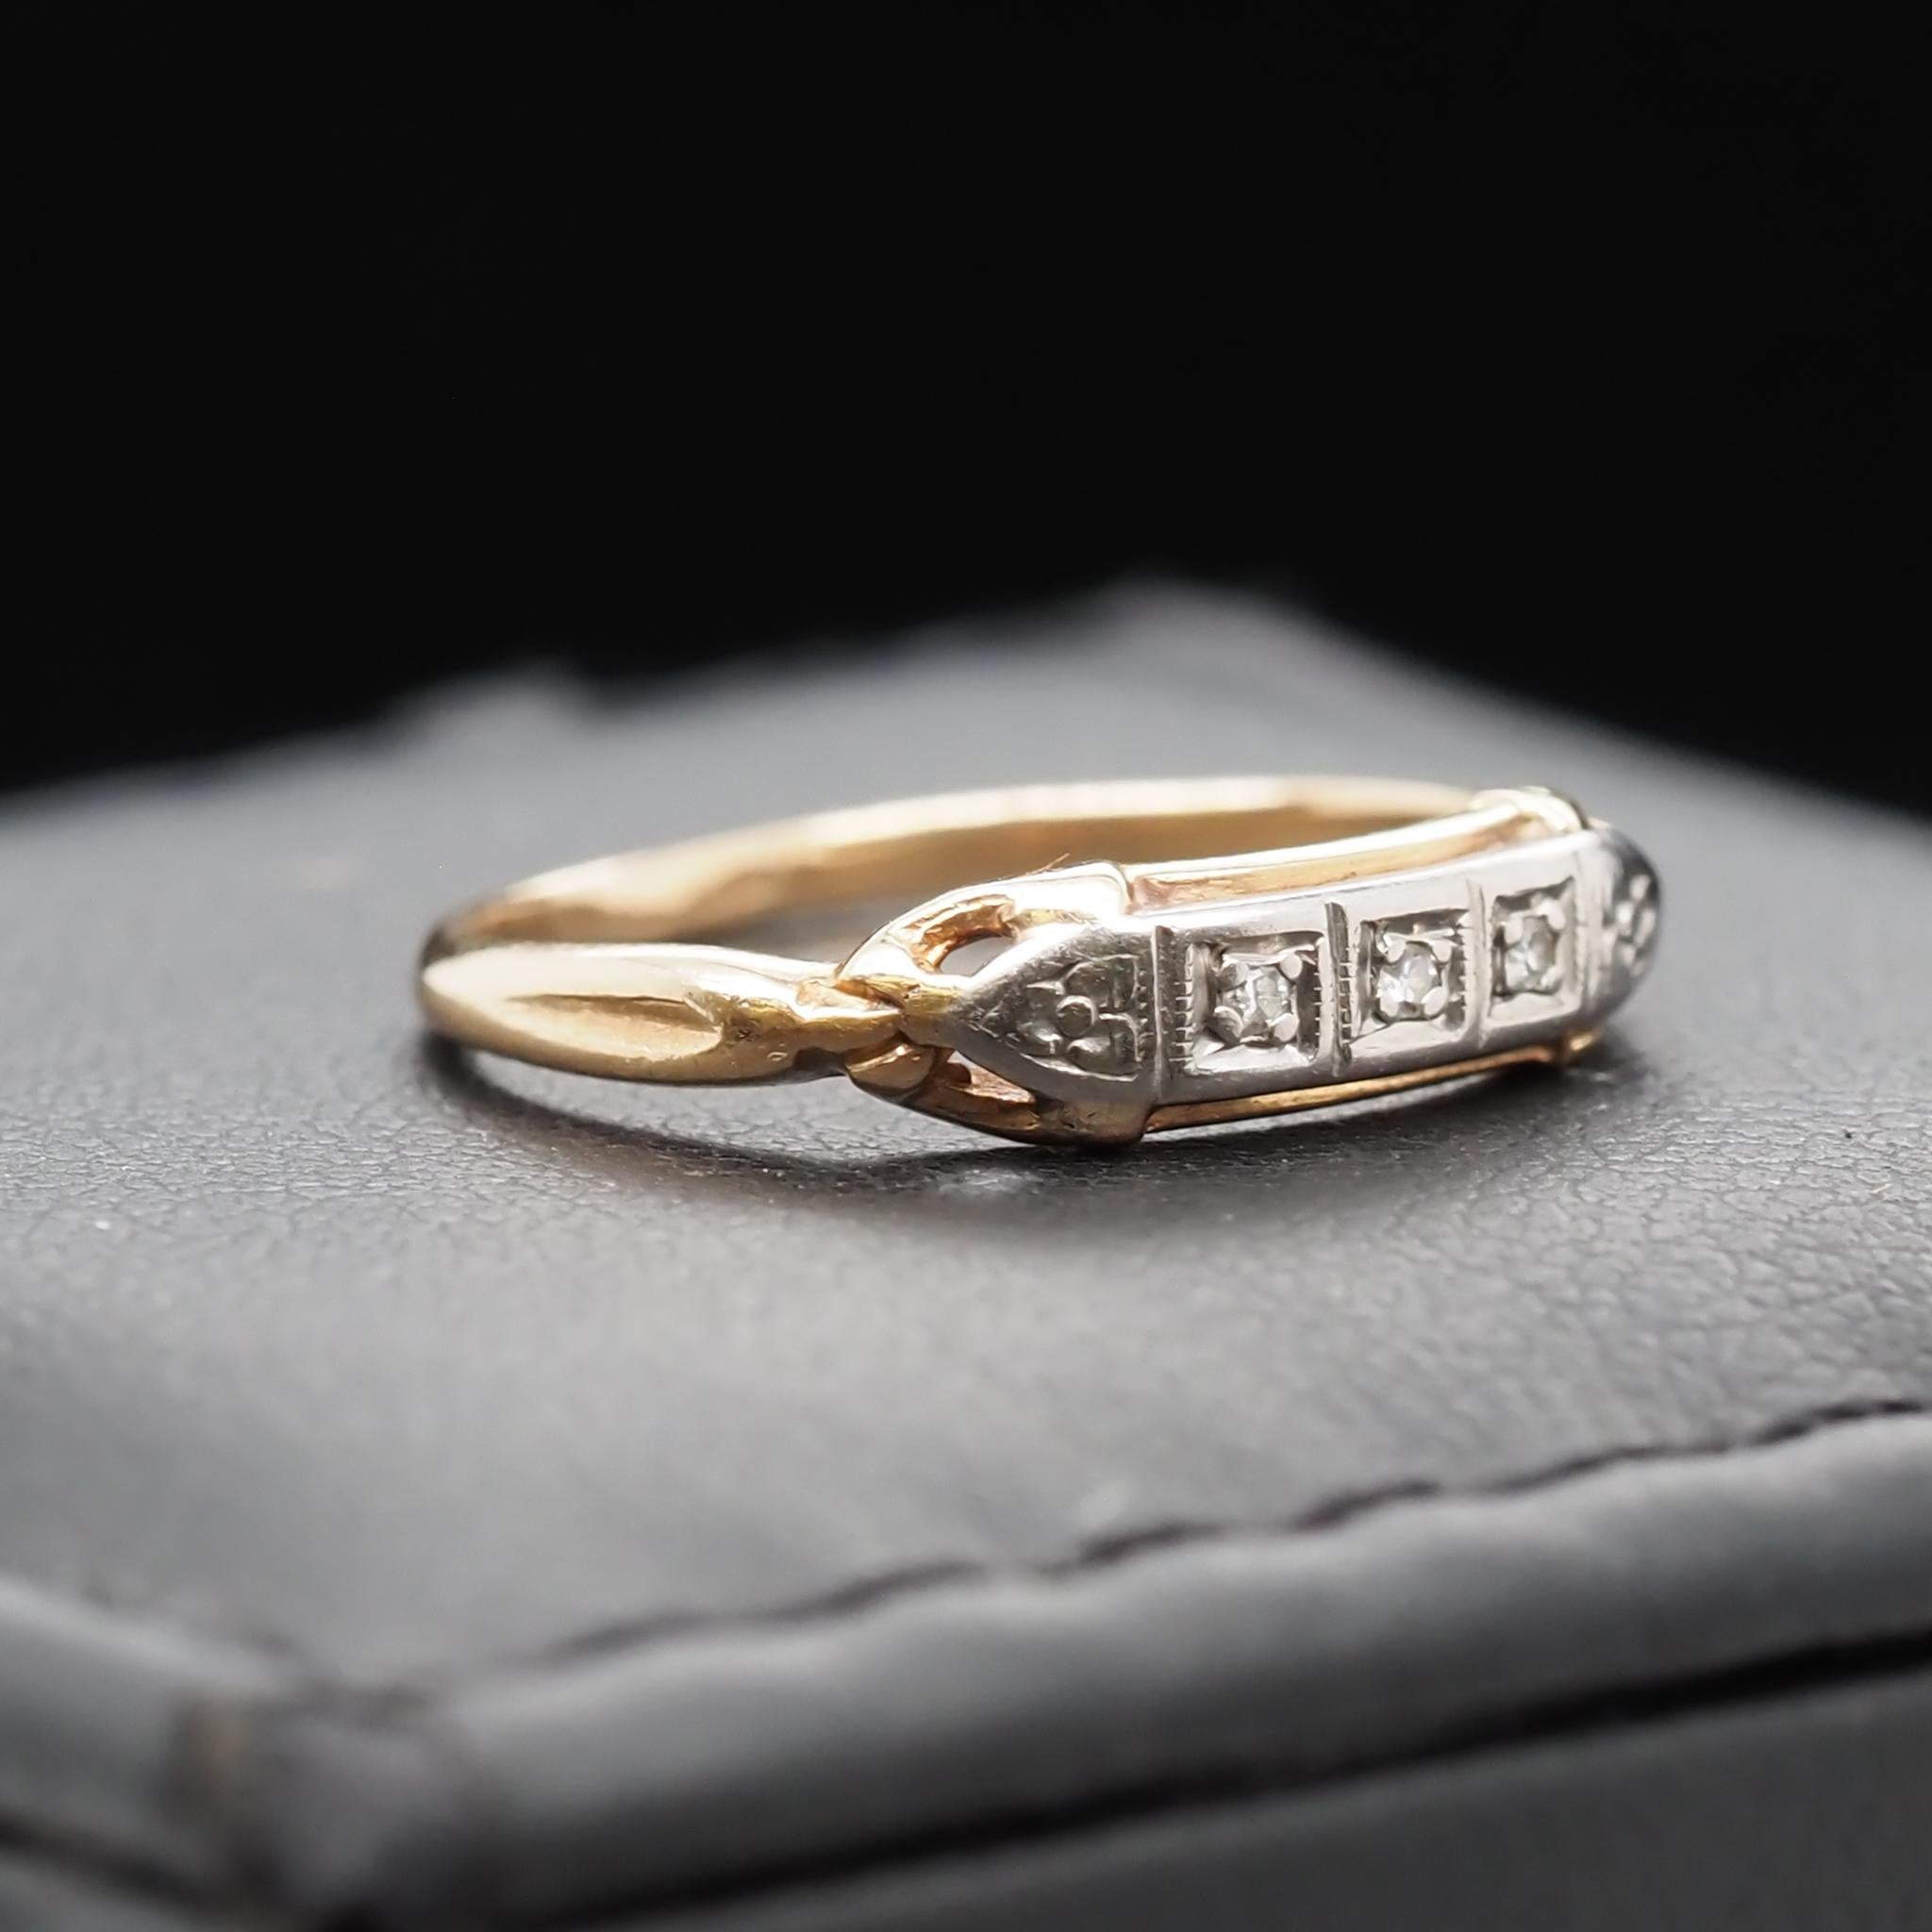 Year: 1930s

Item Details:
Ring Size: 3.75
Metal Type: 14K Yellow Gold [Hallmarked, and Tested]
Weight: 1.0 grams

Diamond Details: .05ct total weight, transitional antique cut, G-H Color, SI Clarity

Band Width: 1.4mm
Condition: Excellent
